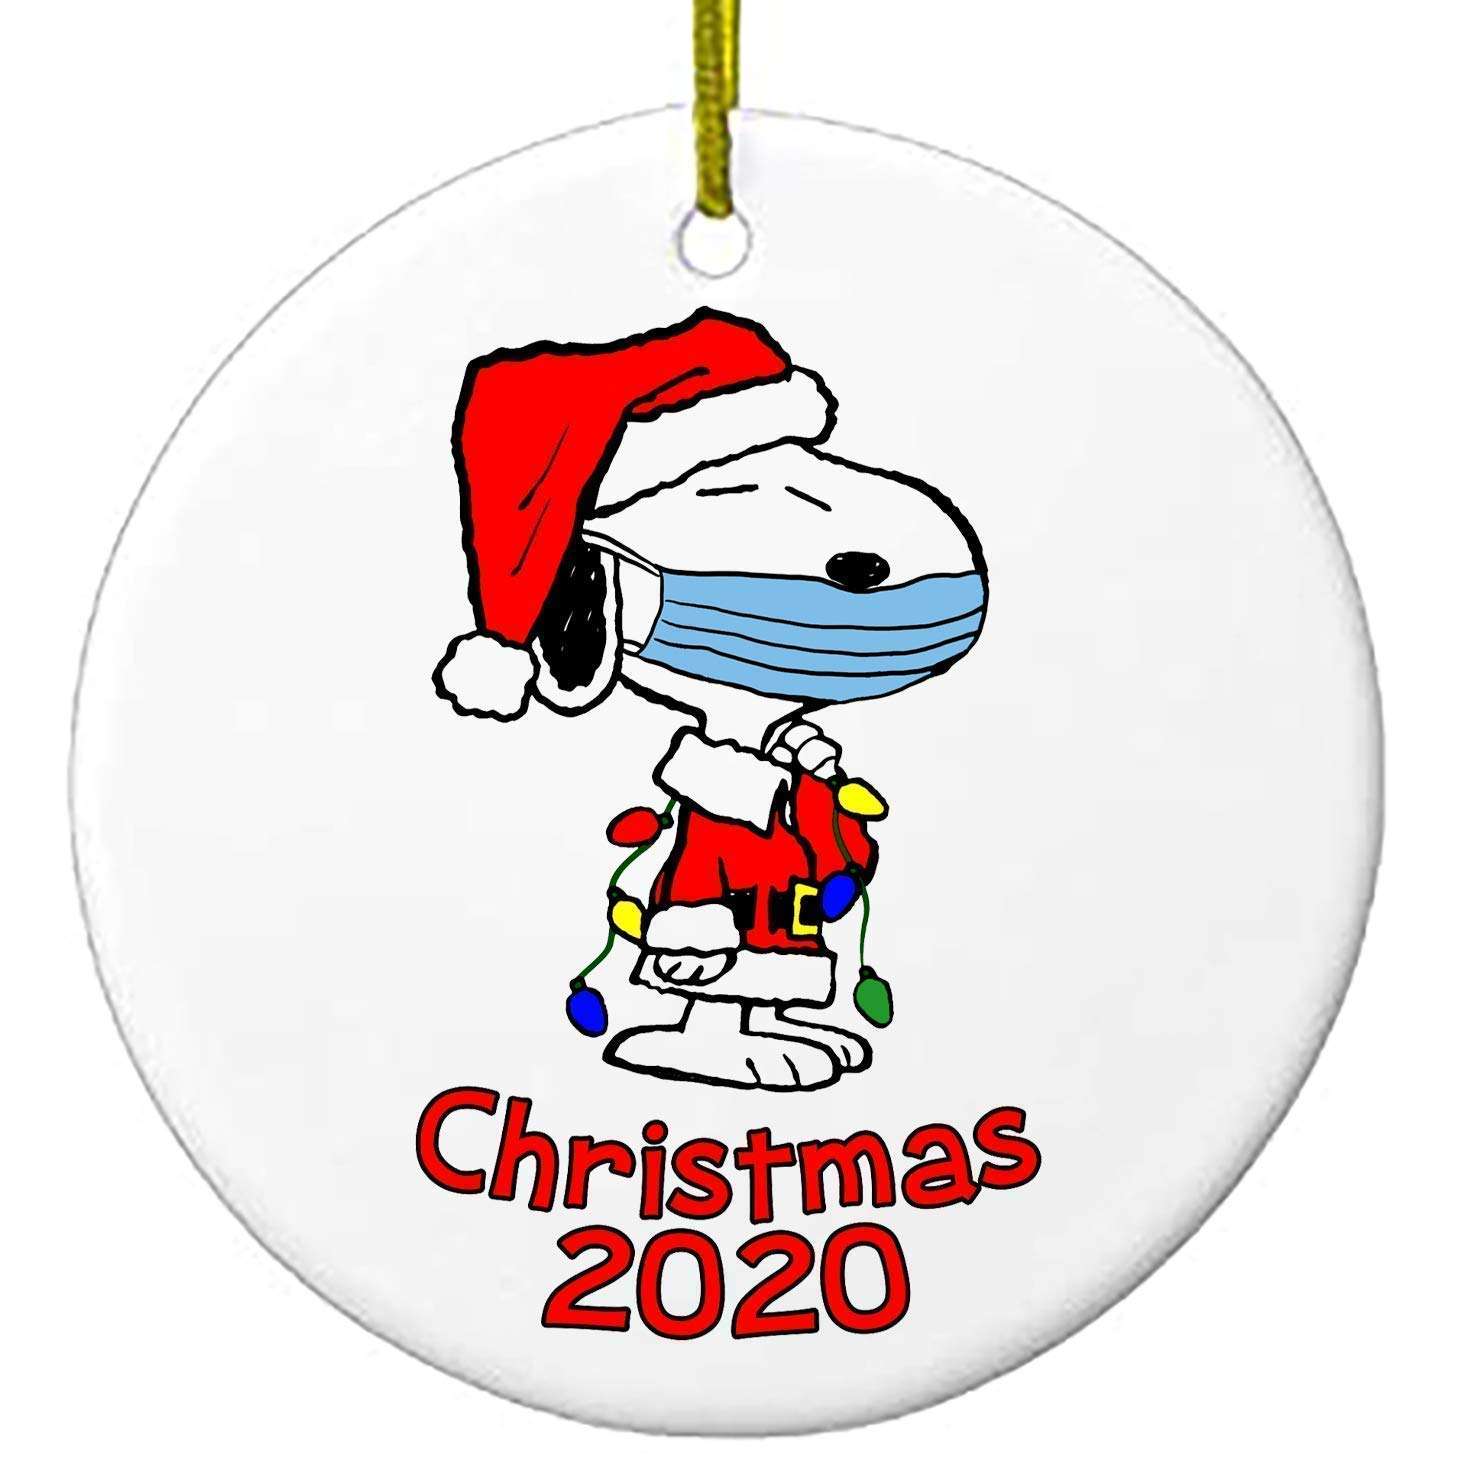 2020 Christmas Ornaments Snoopy With Mask Charlie Brown Peanuts Personalized Gifts